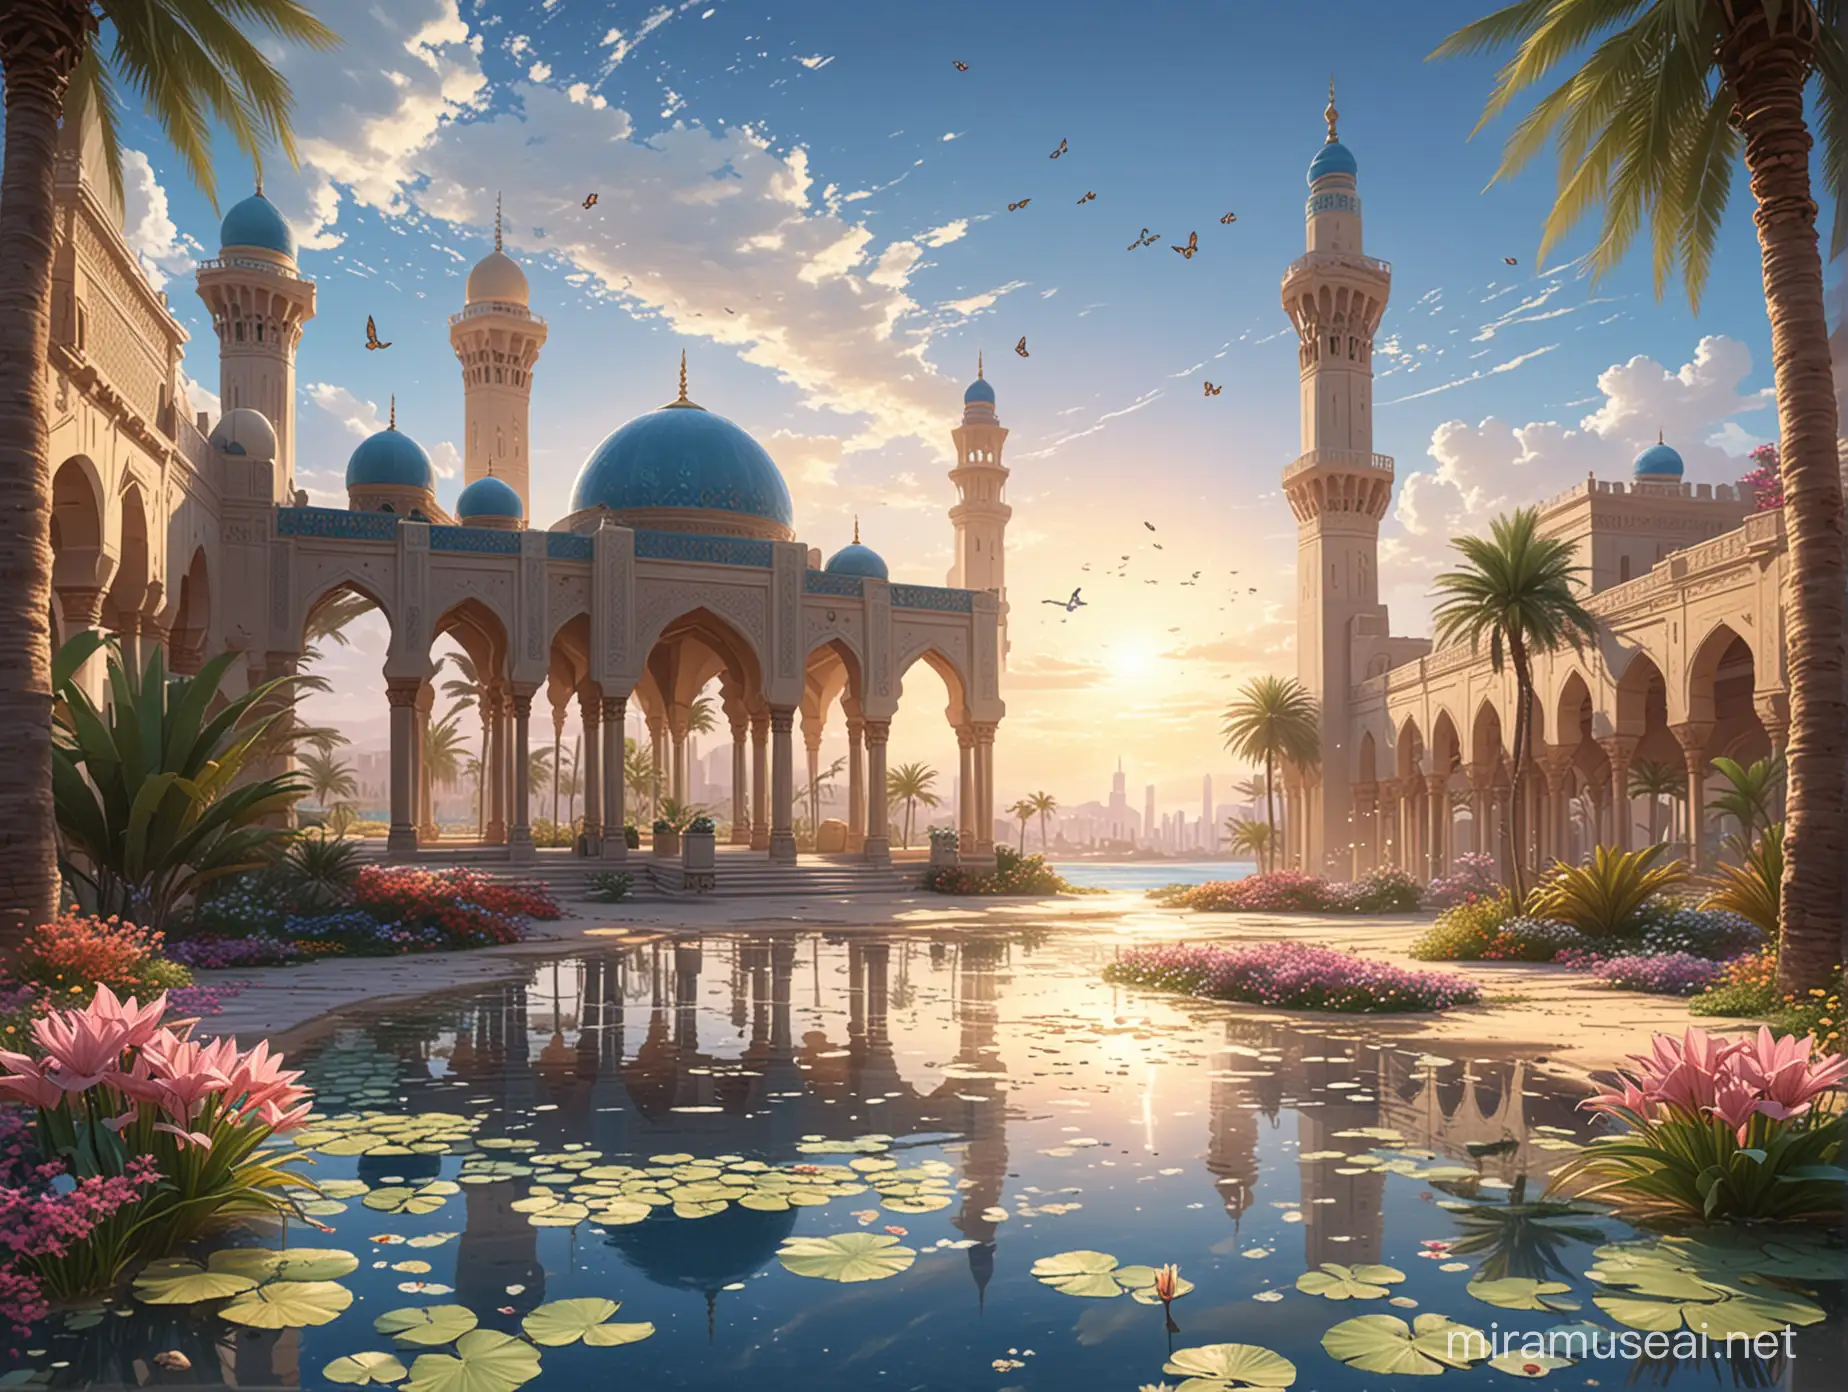 Makoto shinkai style, oasis, palm, sand, arabian style, colorful petals, lily pad, flower beside Oasis, glistening sunlight, arabian mosque, blue sky, clouds, beautiful fantasy Arabian oasis, Egyptian mosque,  butterfly, ultra hd, High quality, anime style.